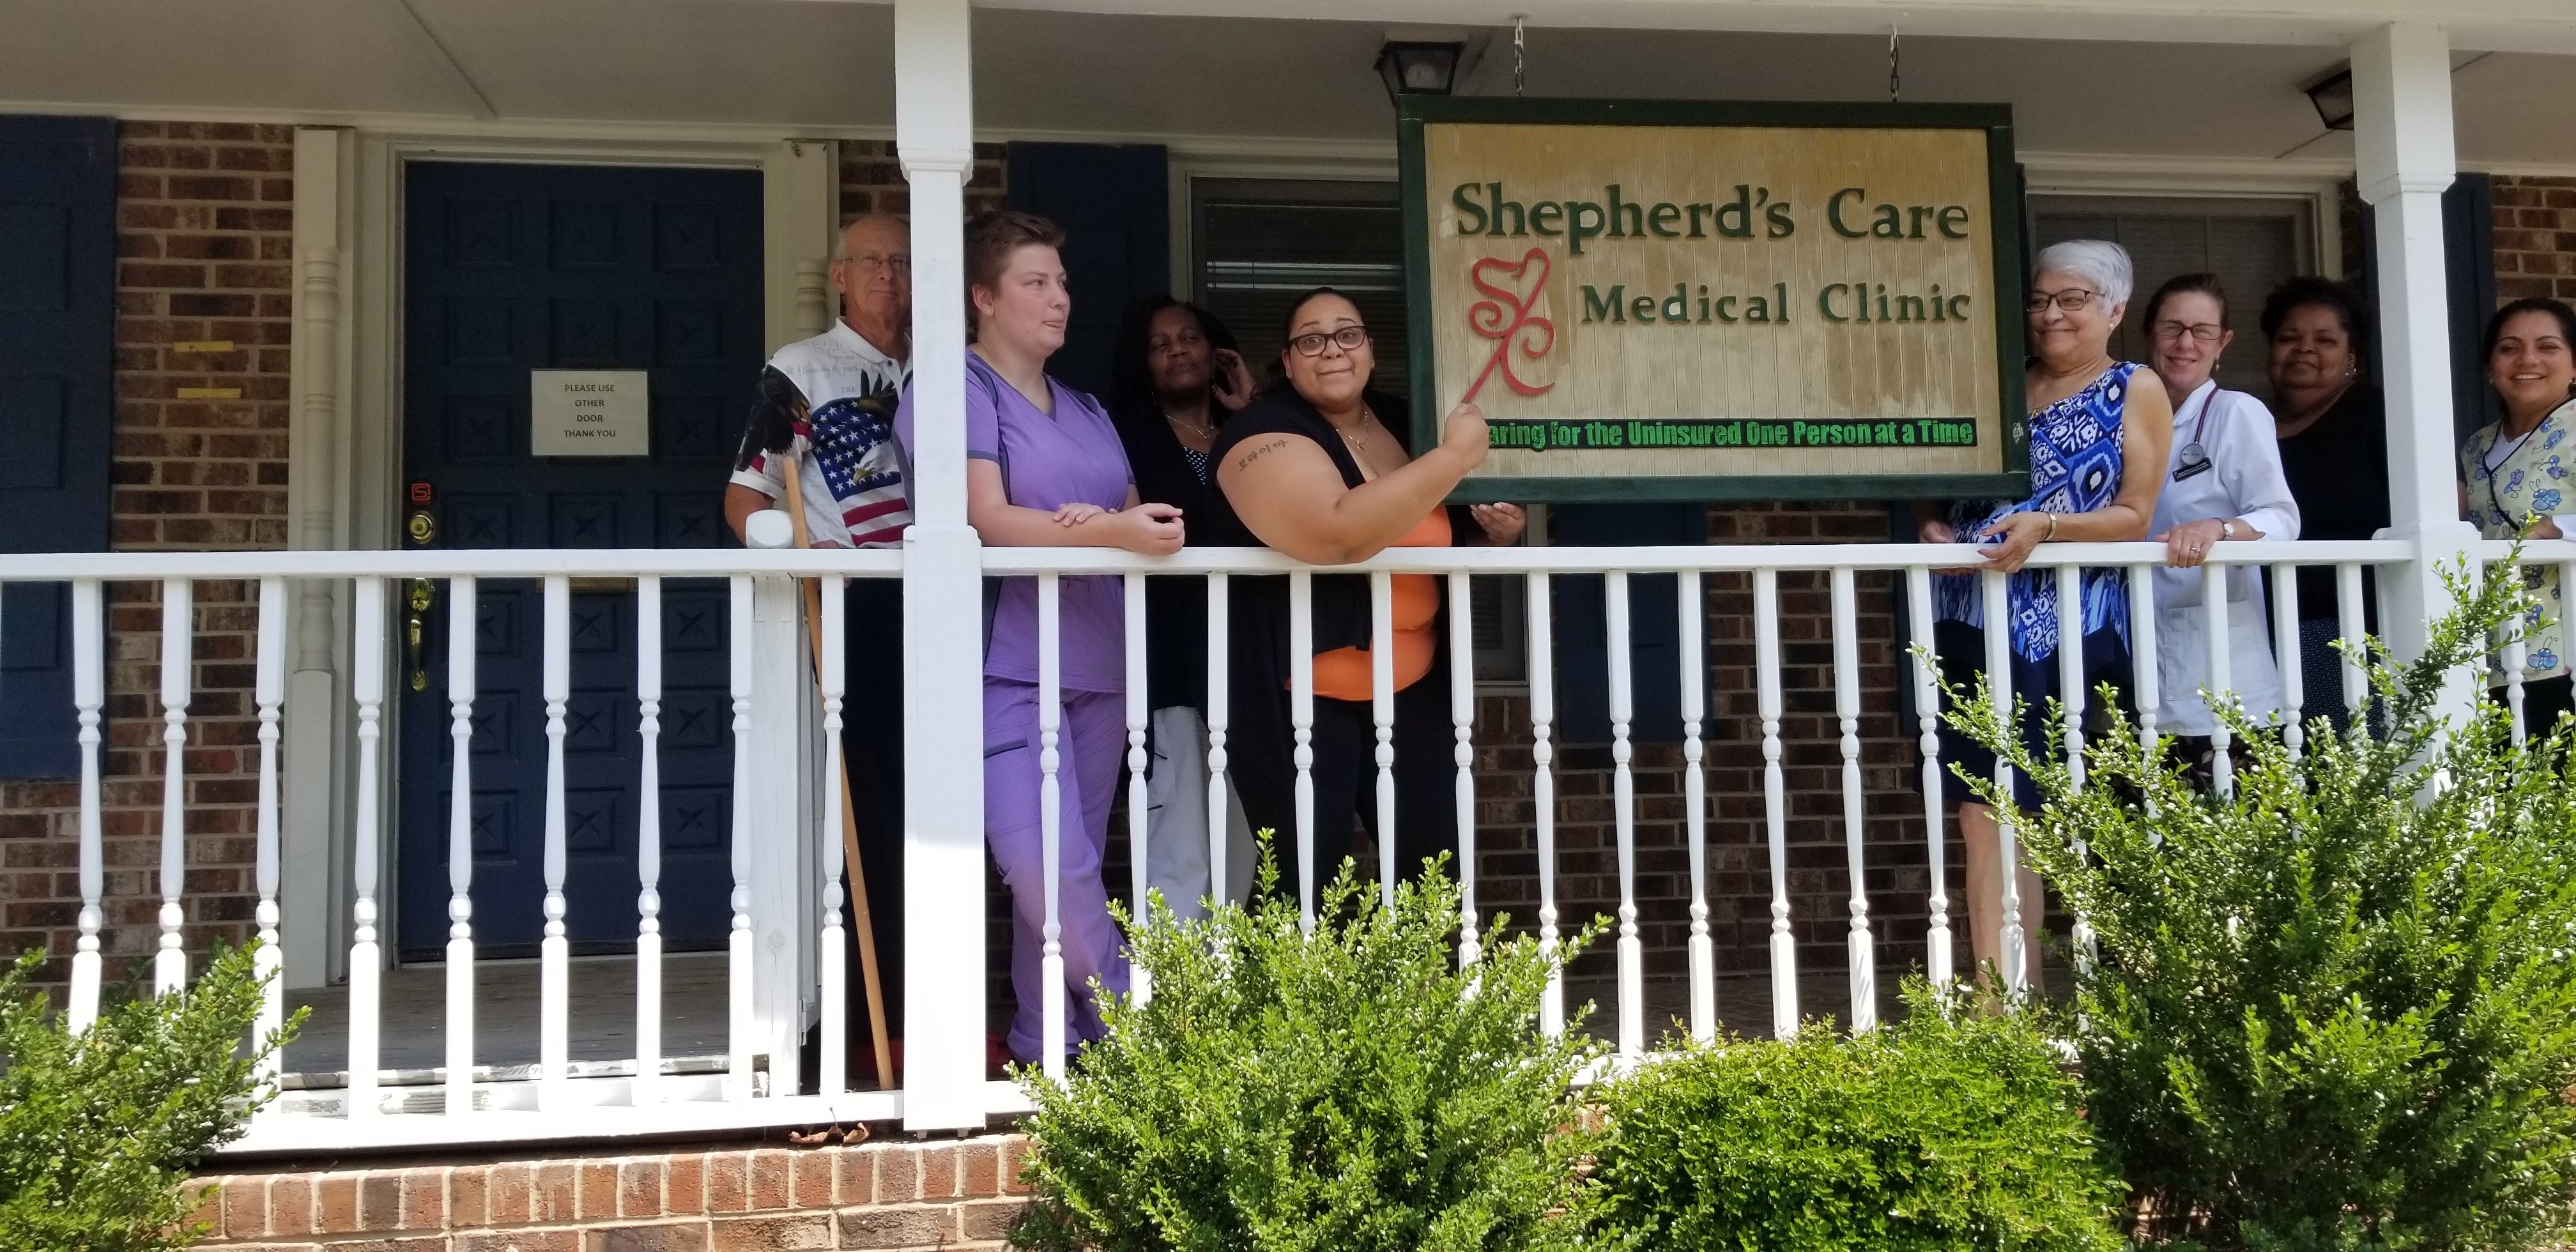 Employees standing in front of Shepherd's Care Medical Clinic